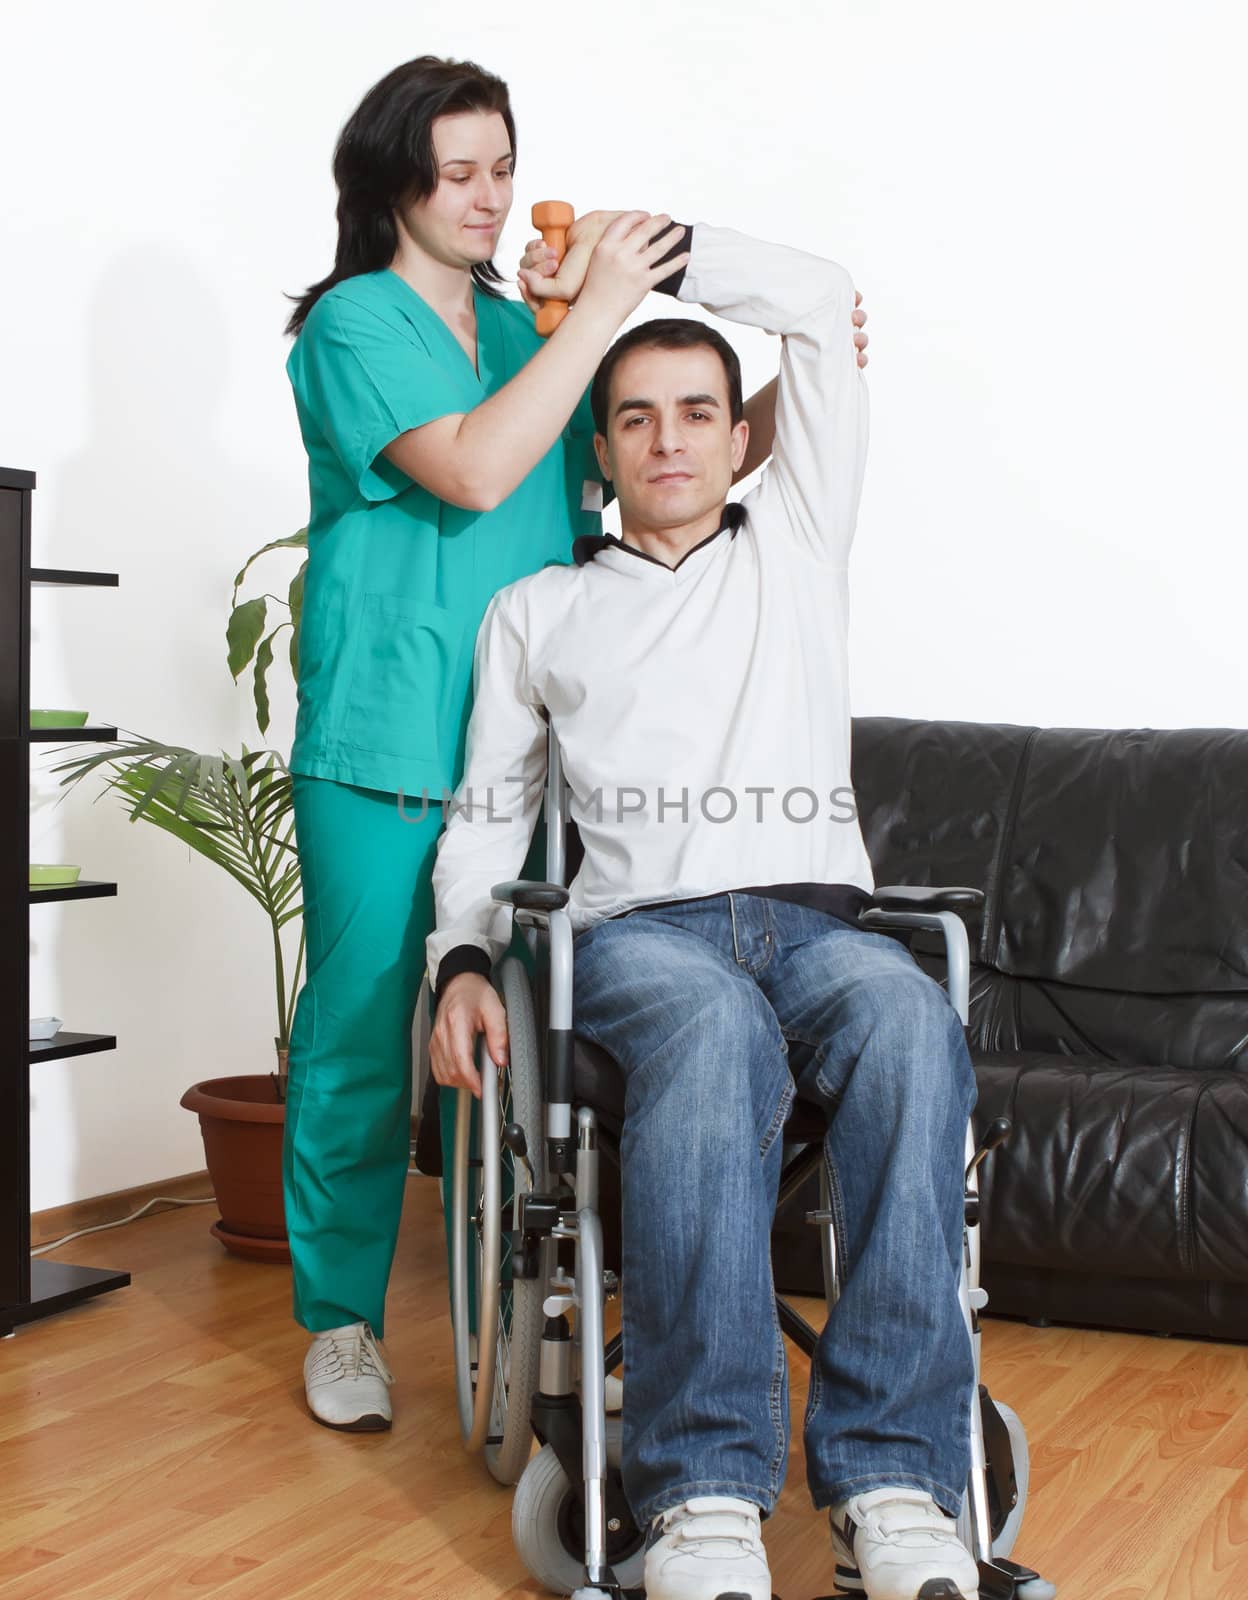 Young Man Working With a Physical Therapist